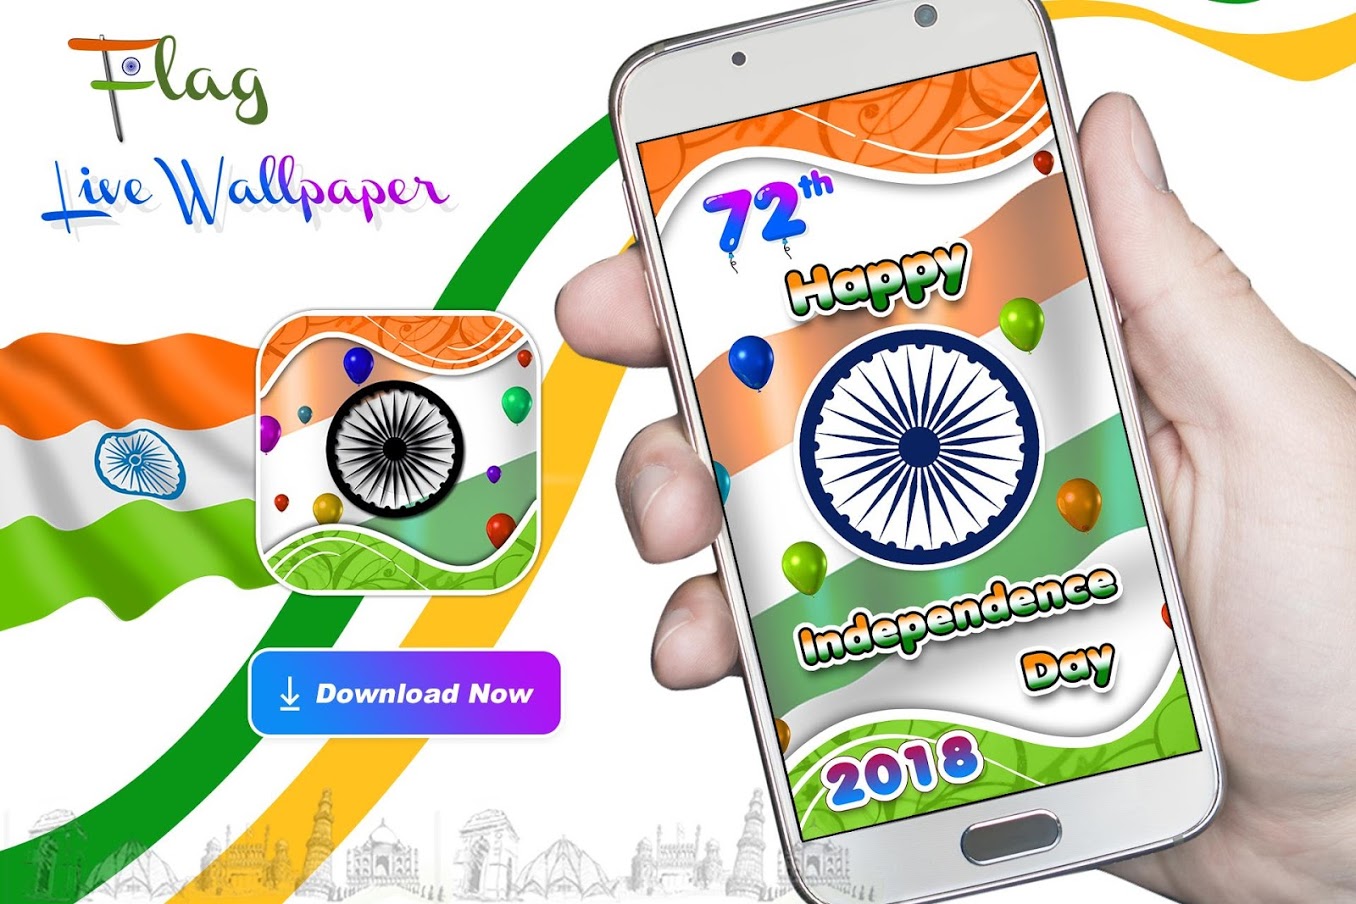 independence day live wallpaper,technology,electronic device,graphics,mobile phone,smartphone